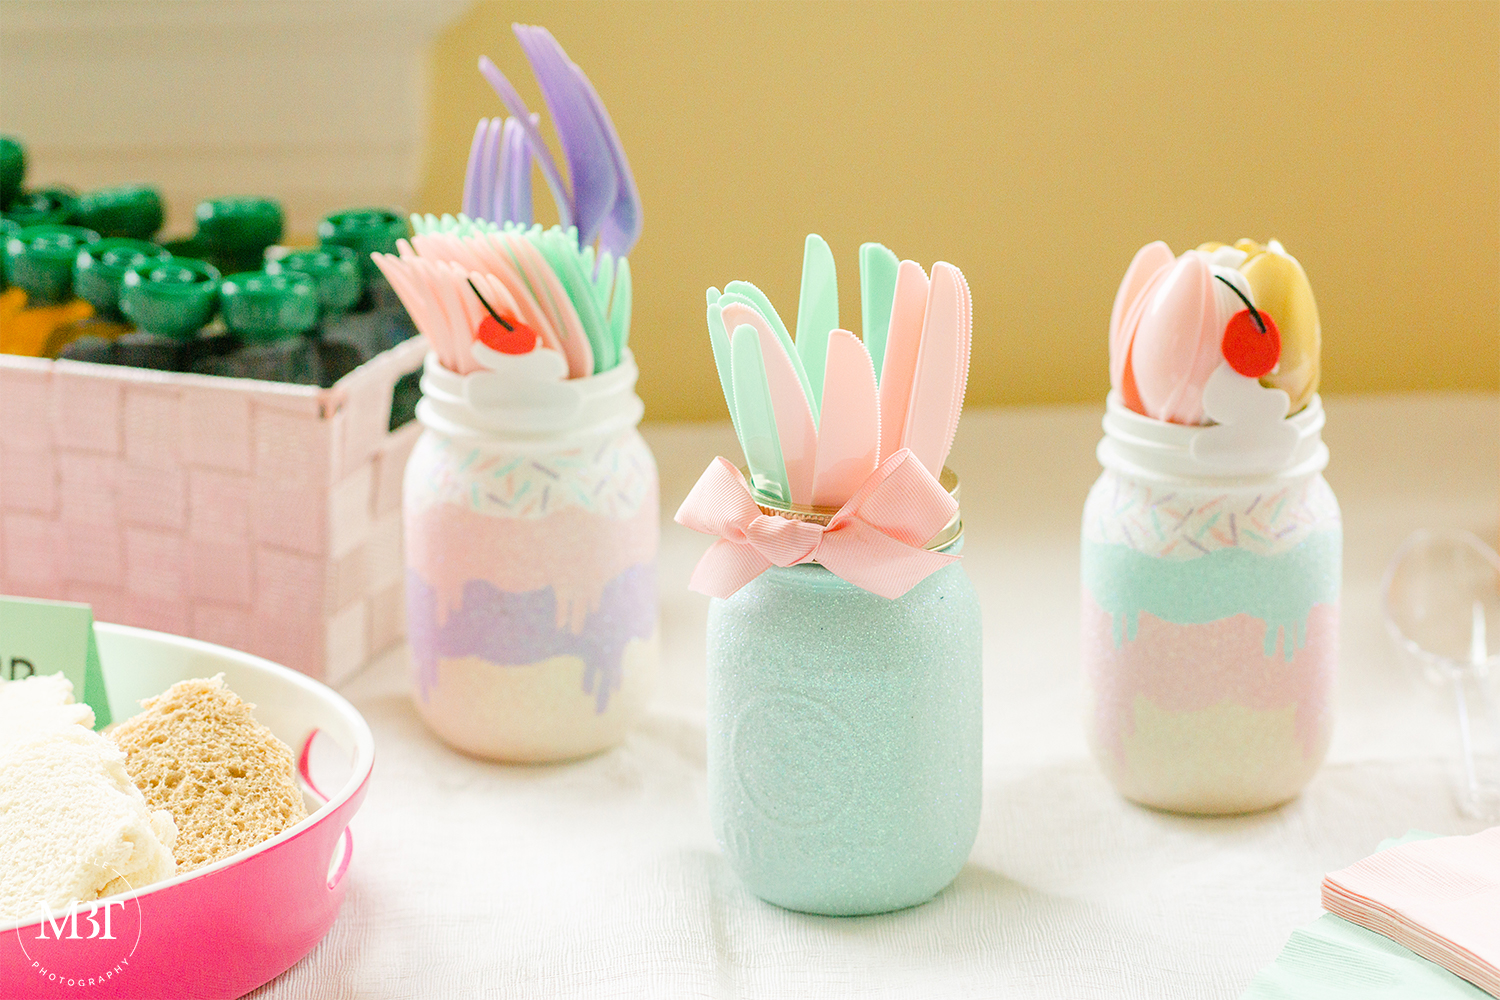 ice cream themed party, details - pastel colored utensils, in Arlington, Virginia, taken by Northern Virginia event photographer